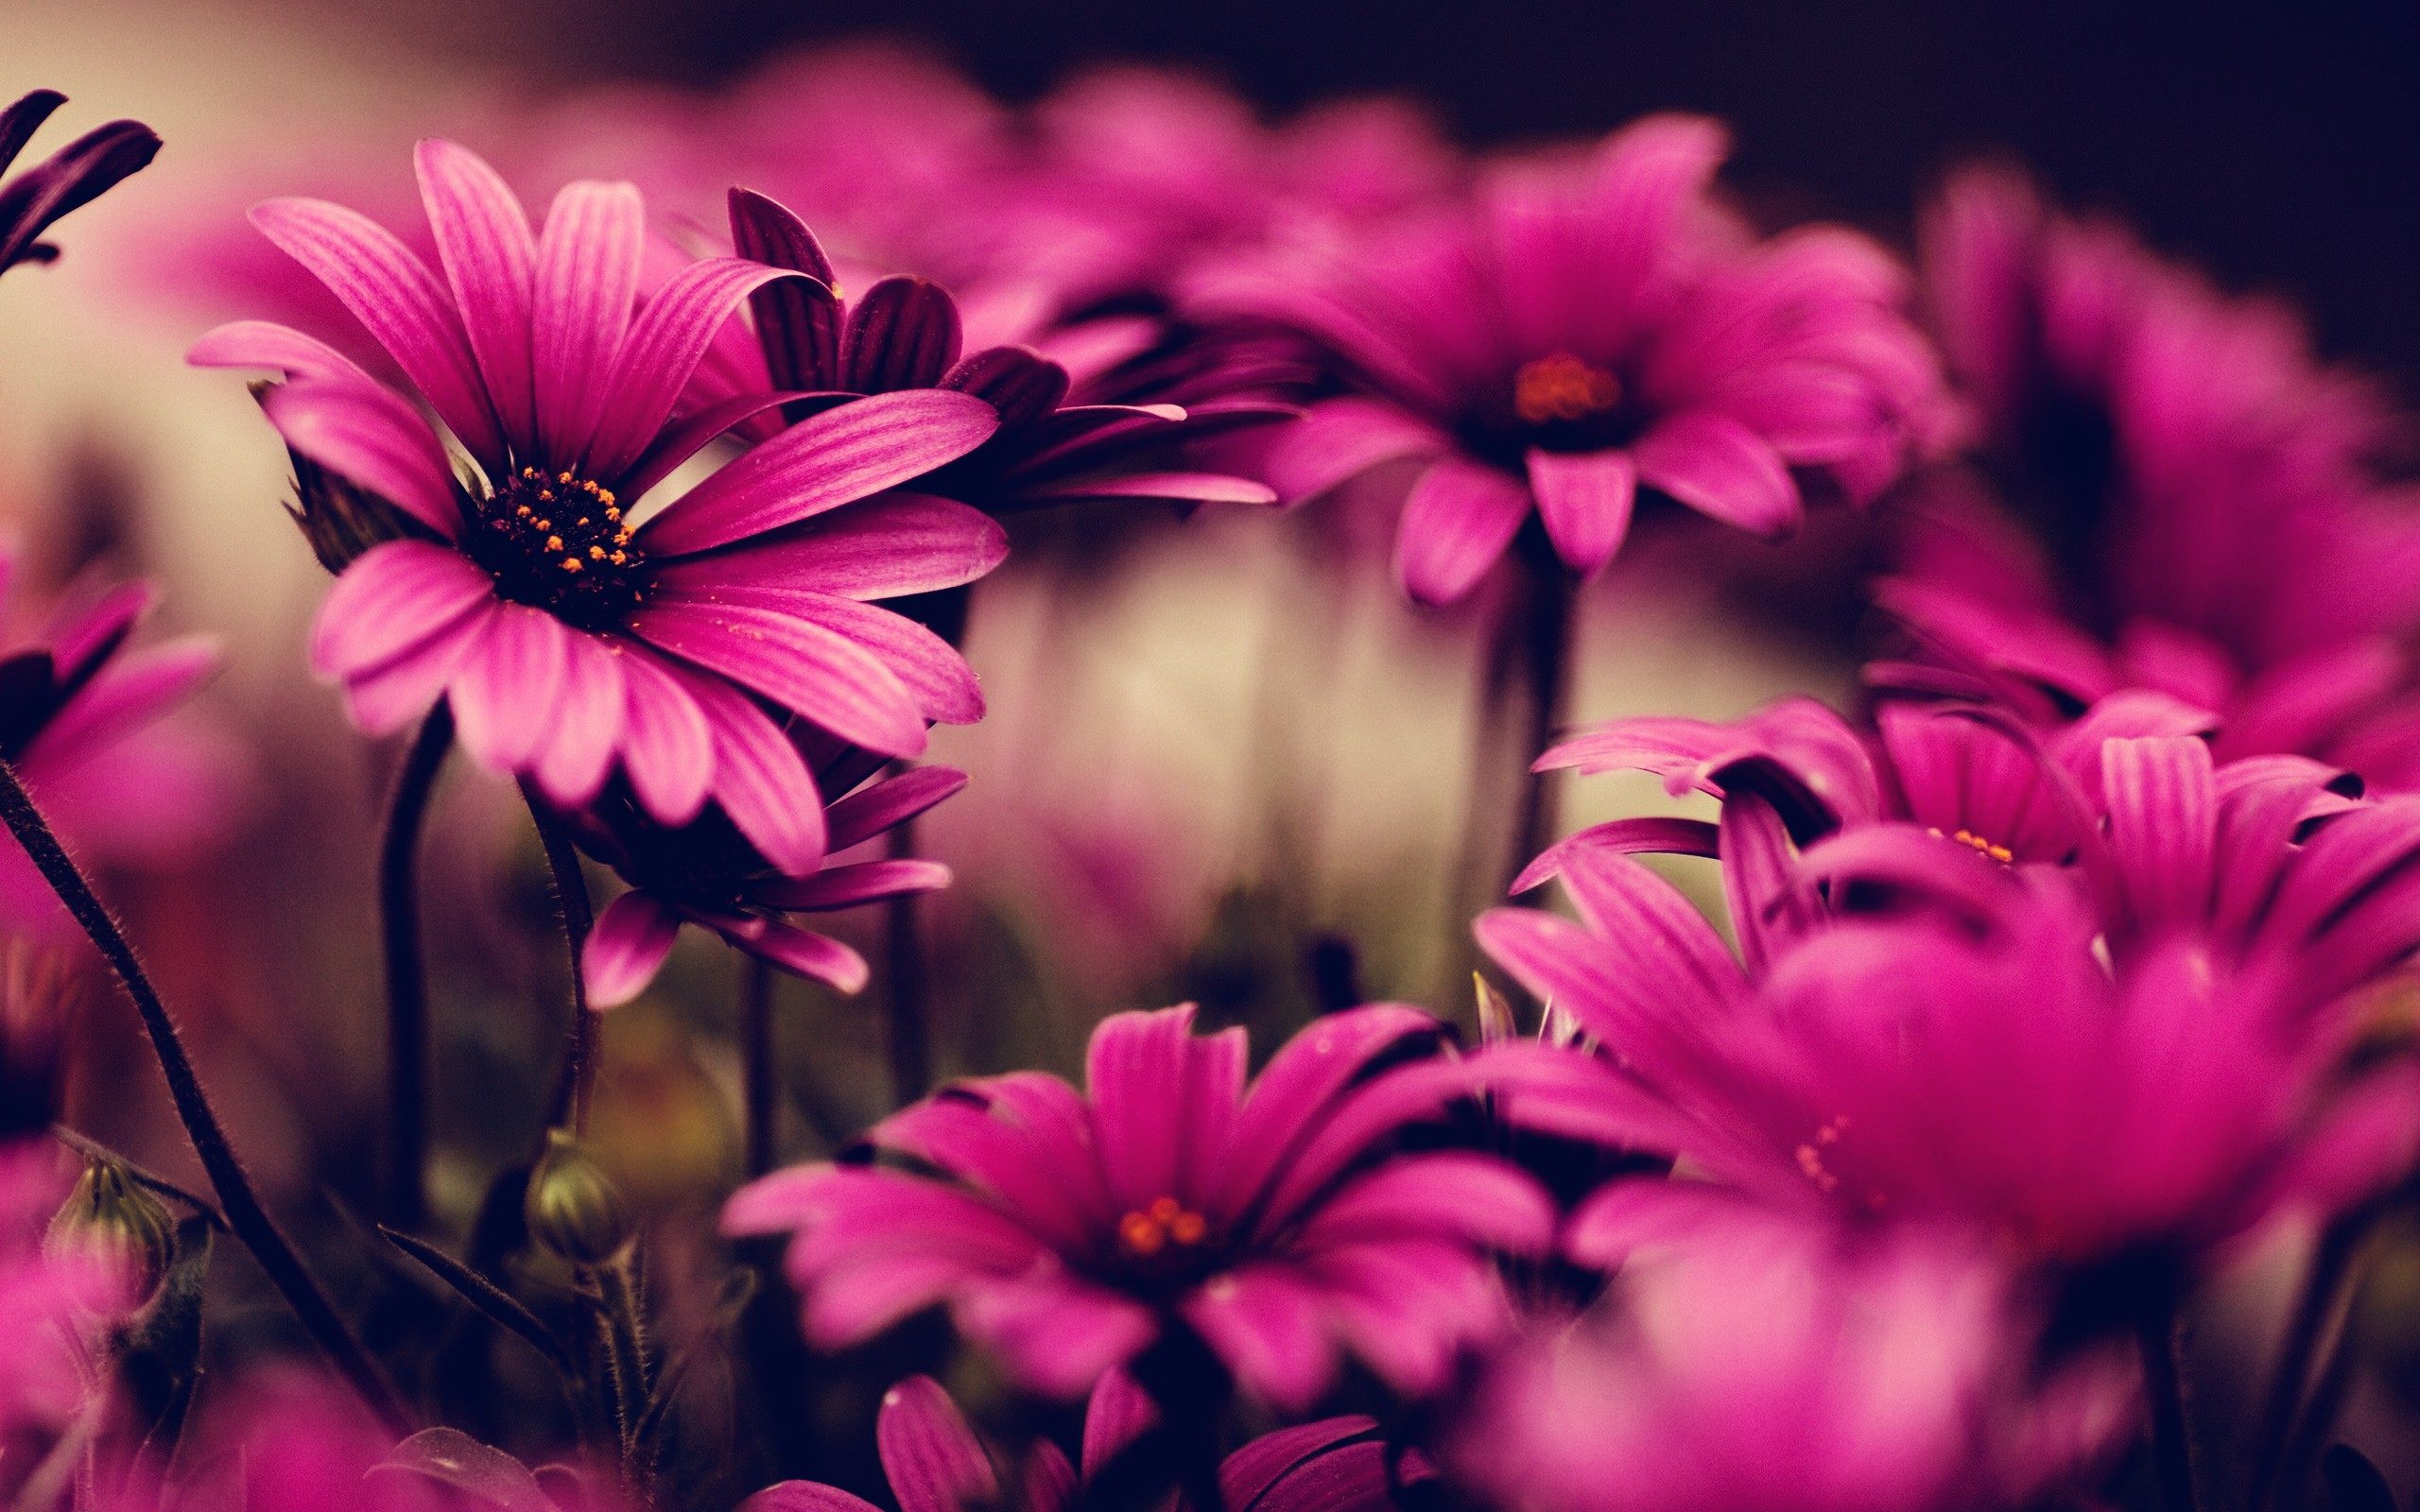 Tag Pink Flowers Wallpaper Background Photos Image And